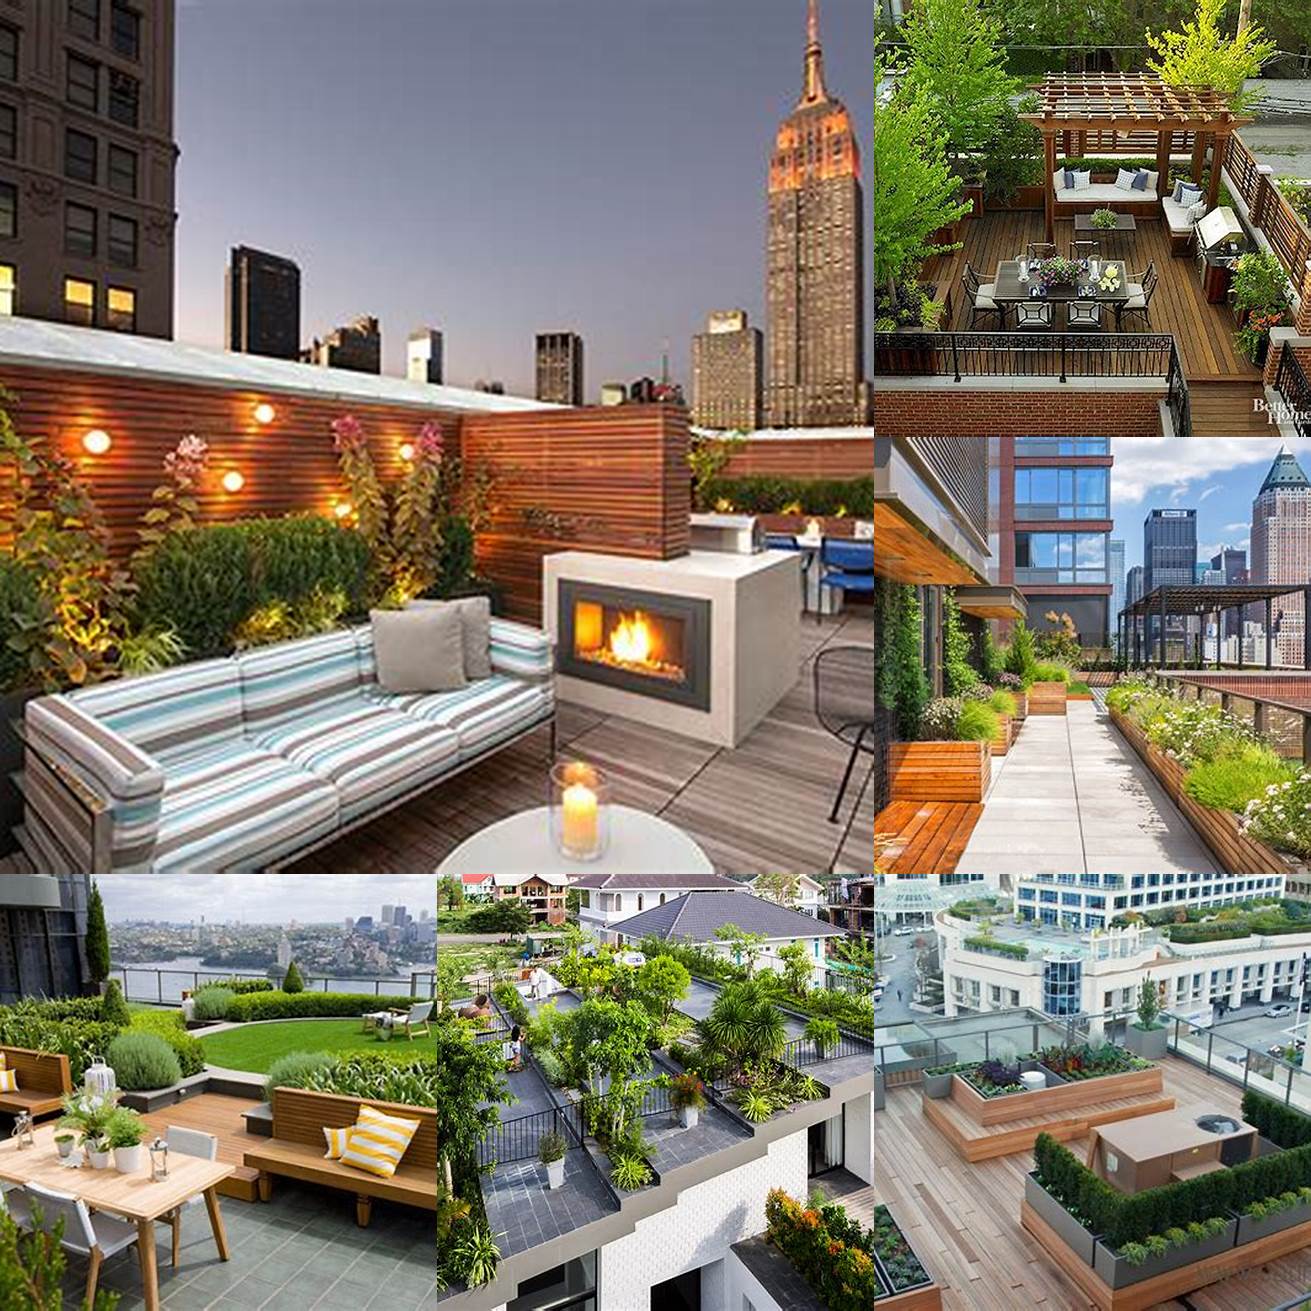 5 Aesthetic appeal Rooftop gardens can be visually stunning adding a touch of greenery to your urban environment